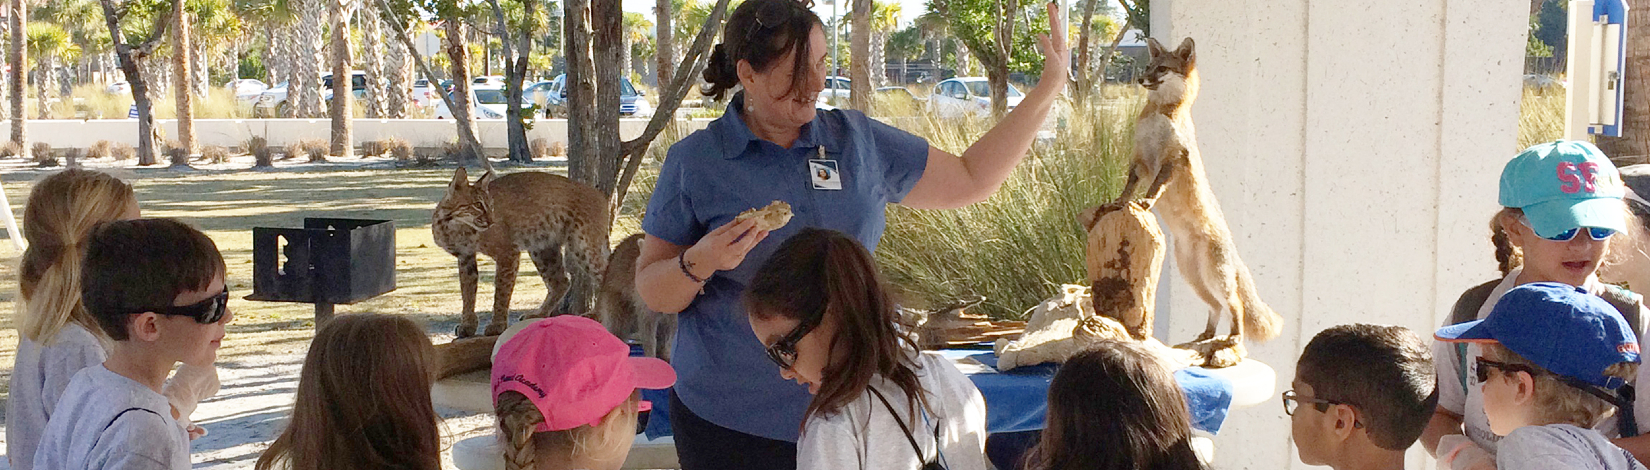 a uf/ifas extension sarasota county educator teaches an array of students about wildlife, with wildlife props in the background